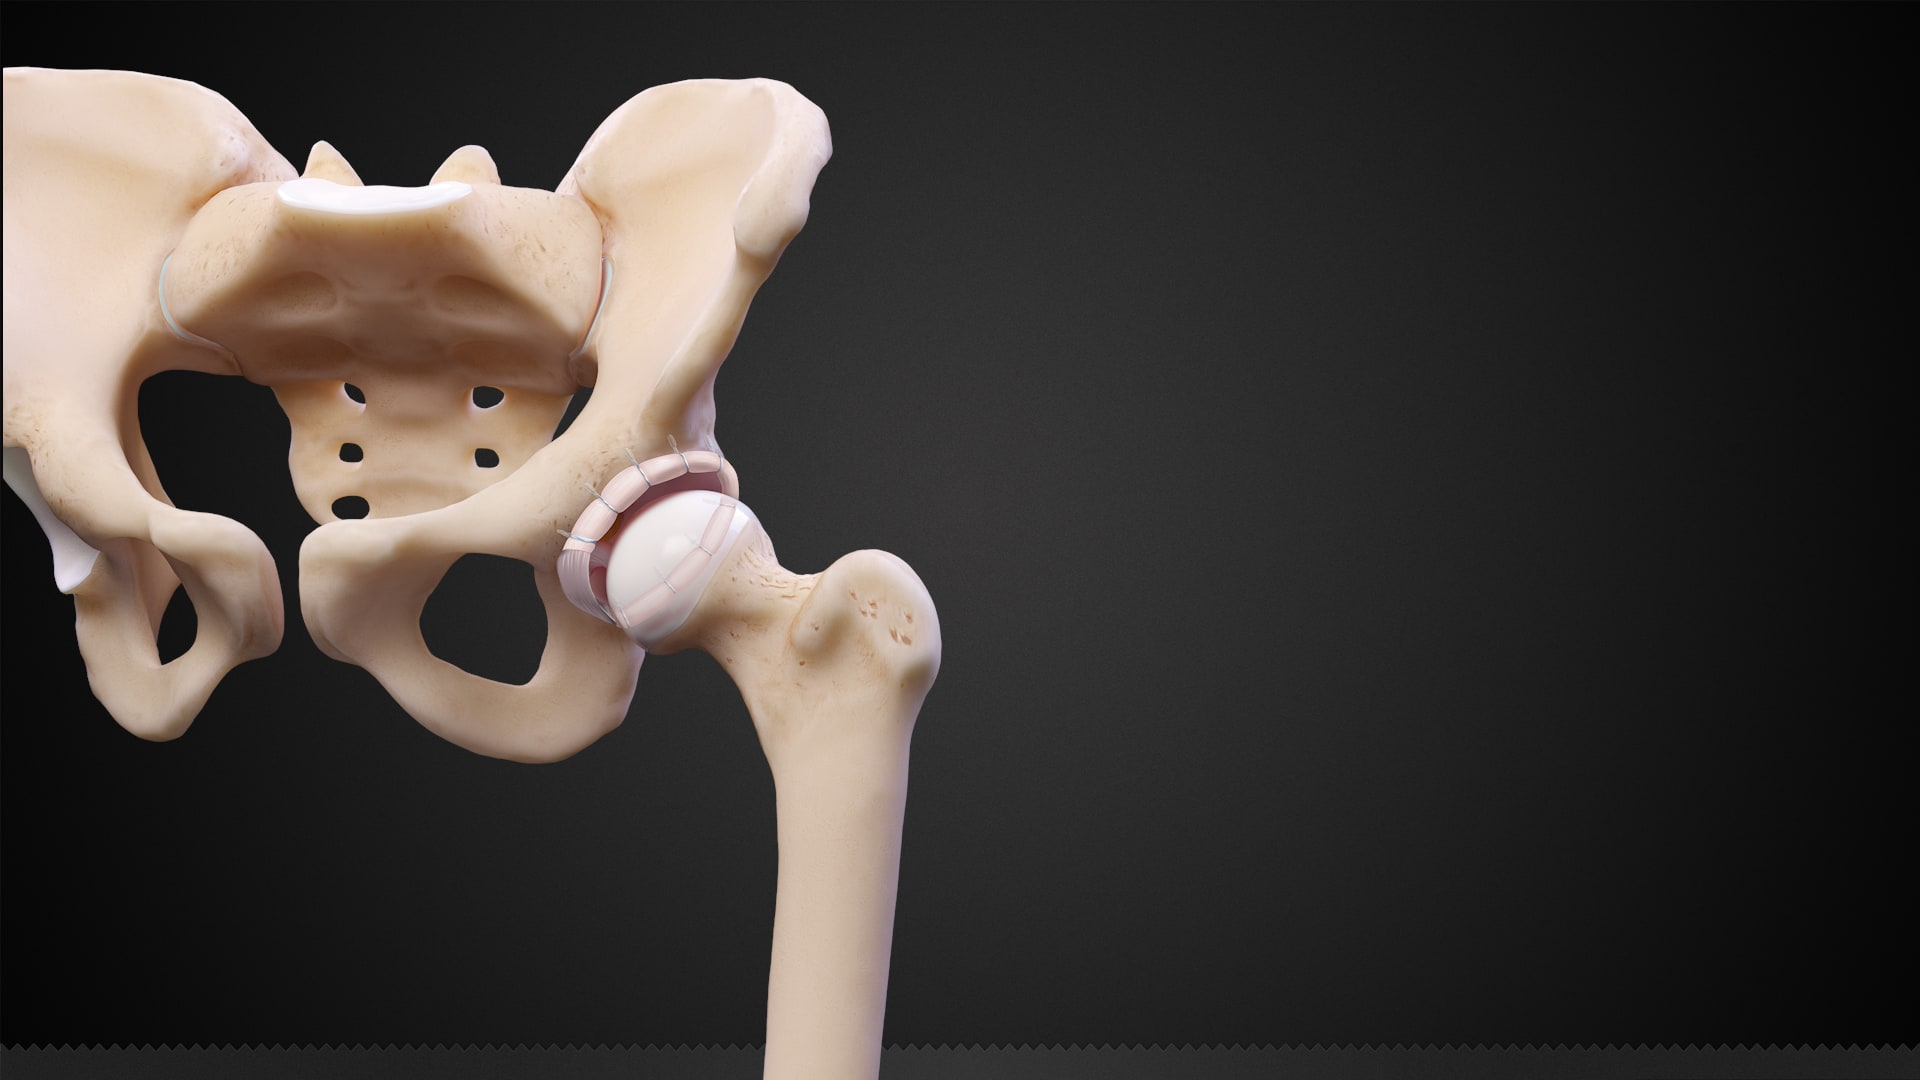 Acetabular Labral Reconstruction in Conjunction With a Periacetabular Osteotomy (PAO)